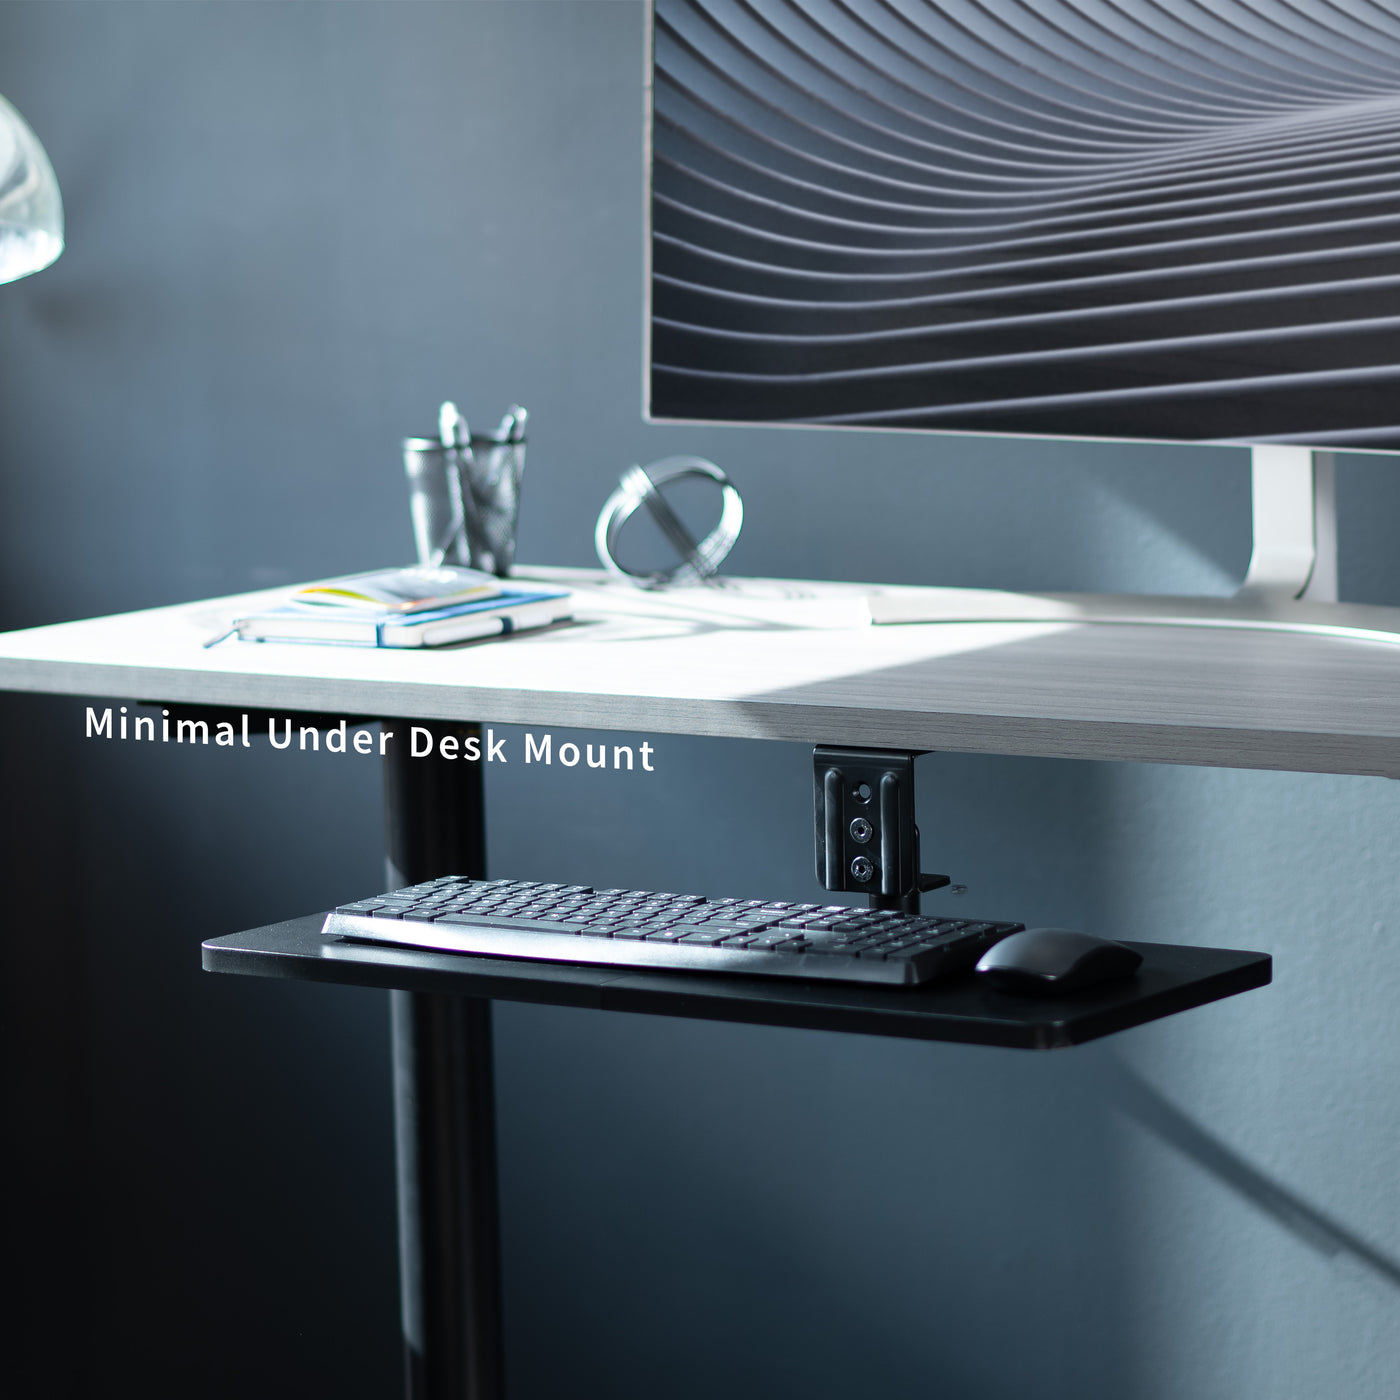 Low-profile under desk keyboard tray with 360-degree rotation.